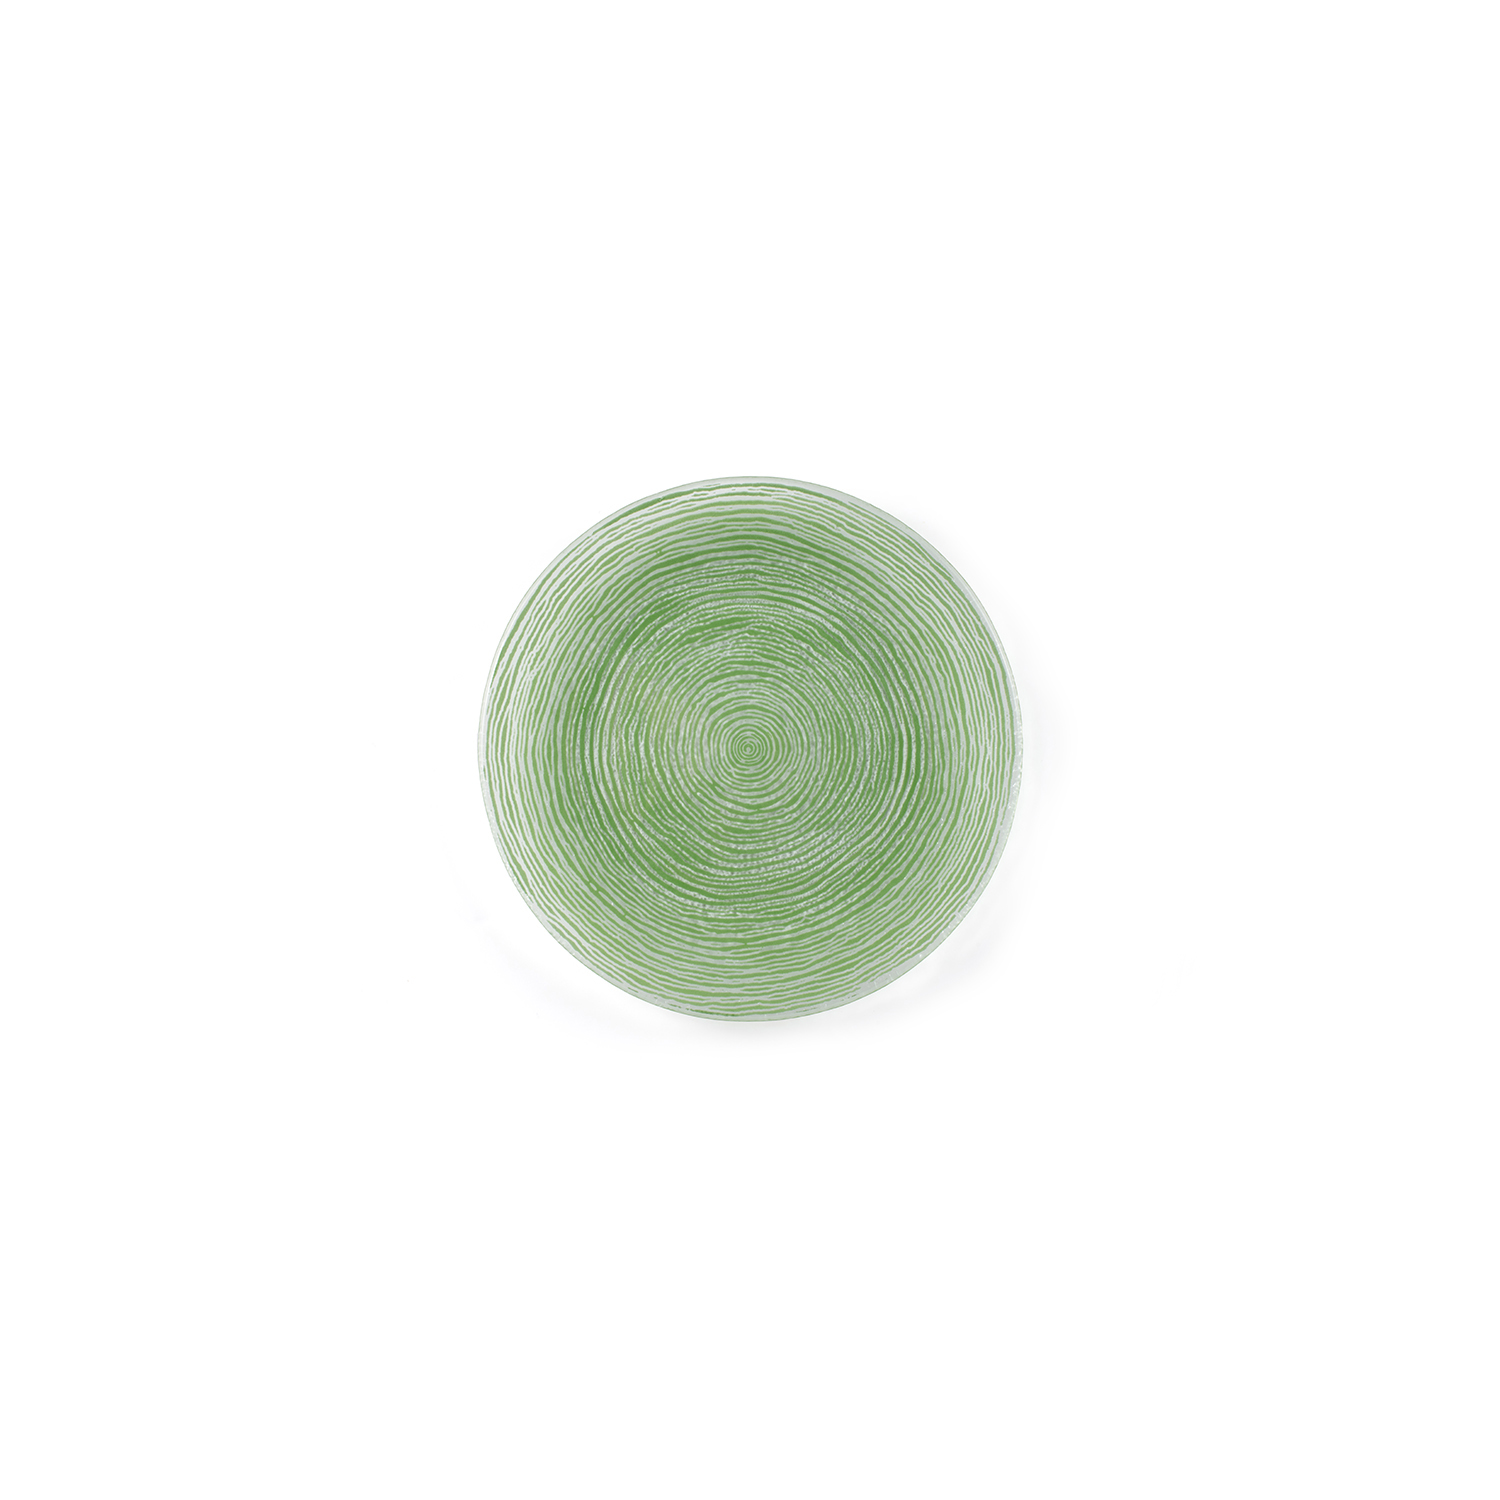 Fusion Glass Plate Green Round 7.75″ x 7.75″ x 0.5″  CasePack:12